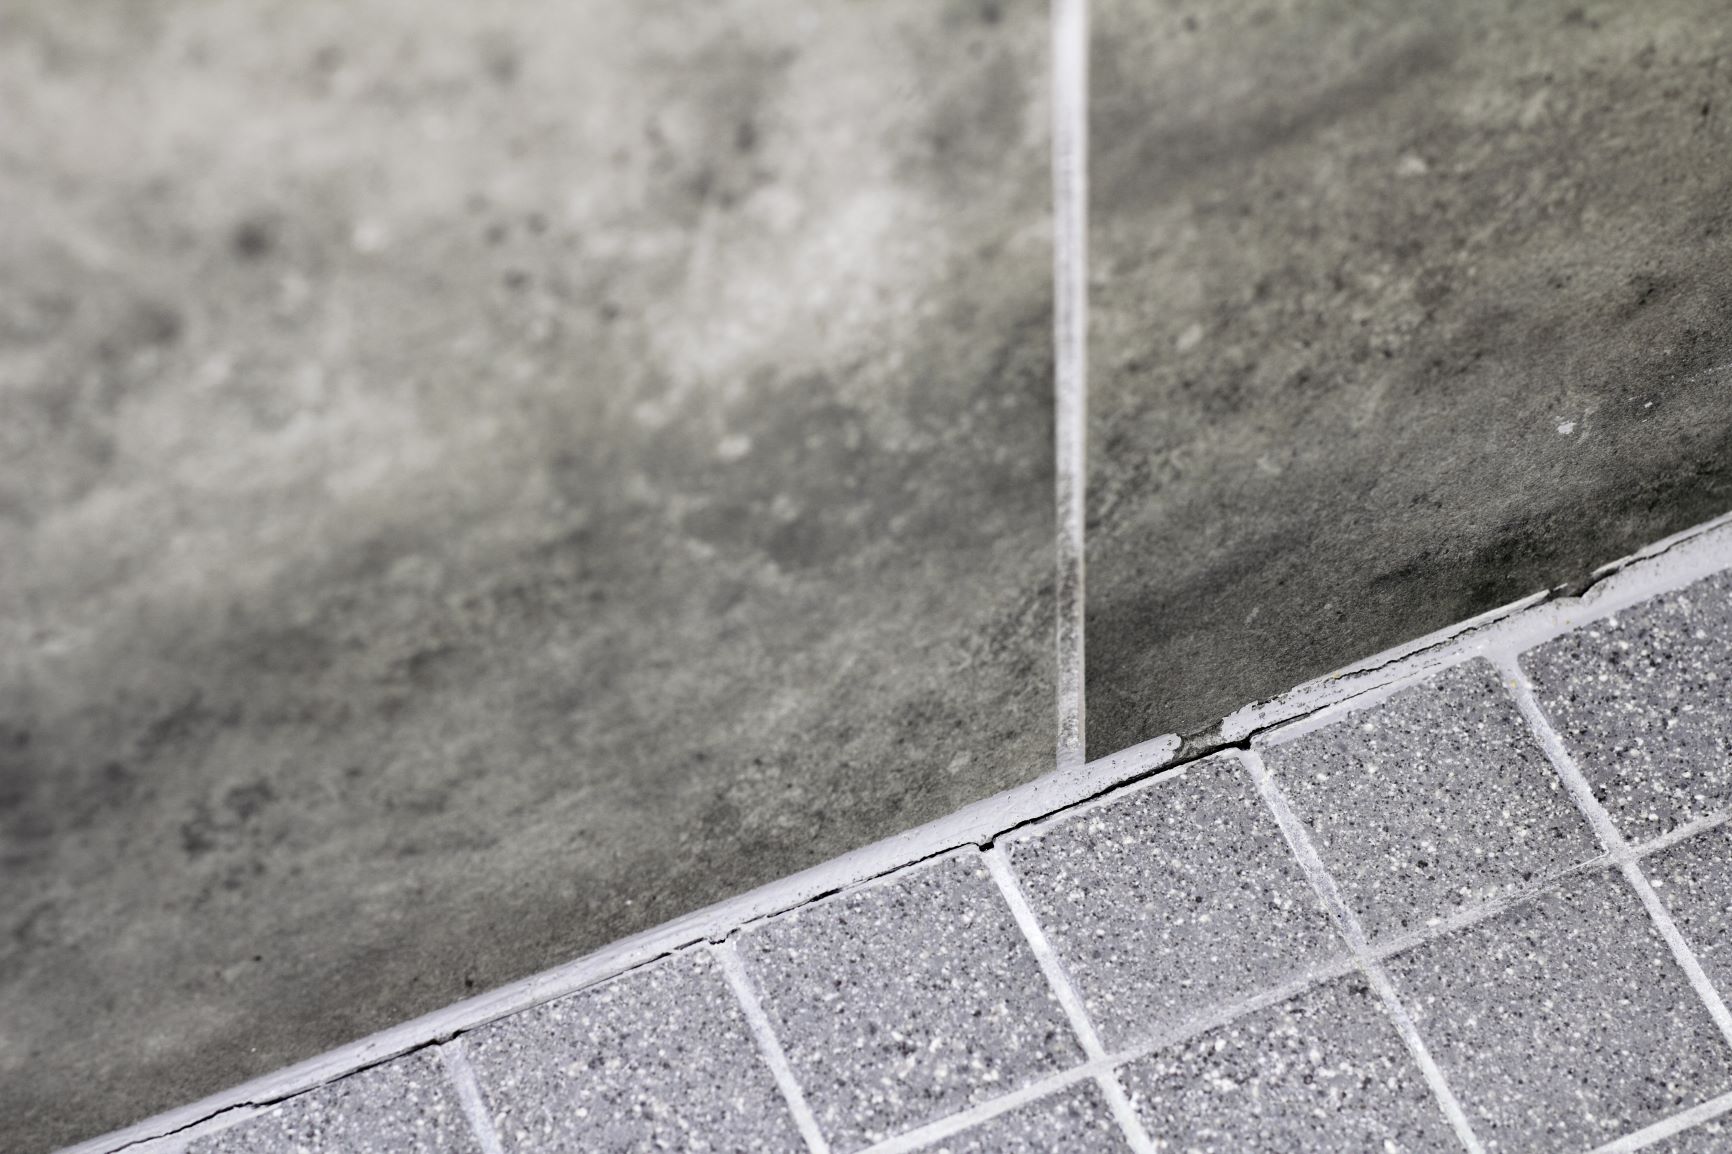 How to Repair a Soft, Cracked Floor in a Tub or Shower 